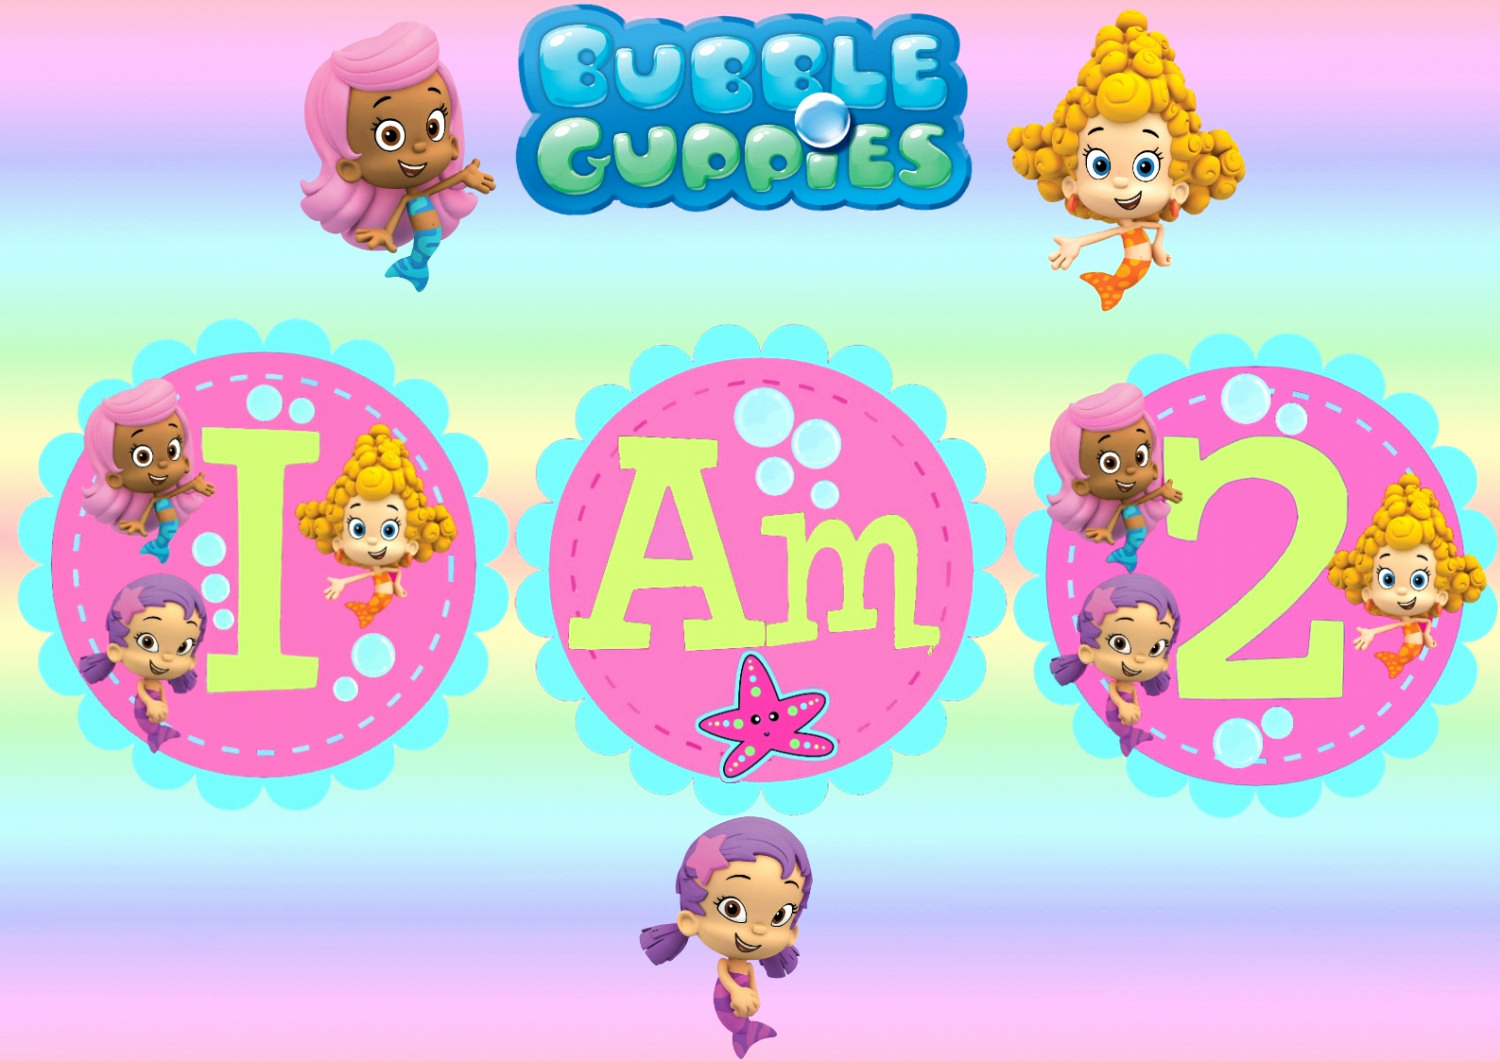 Bubble Guppies Invitation Template Free Fresh Etsy Your Place to and Sell All Things Handmade